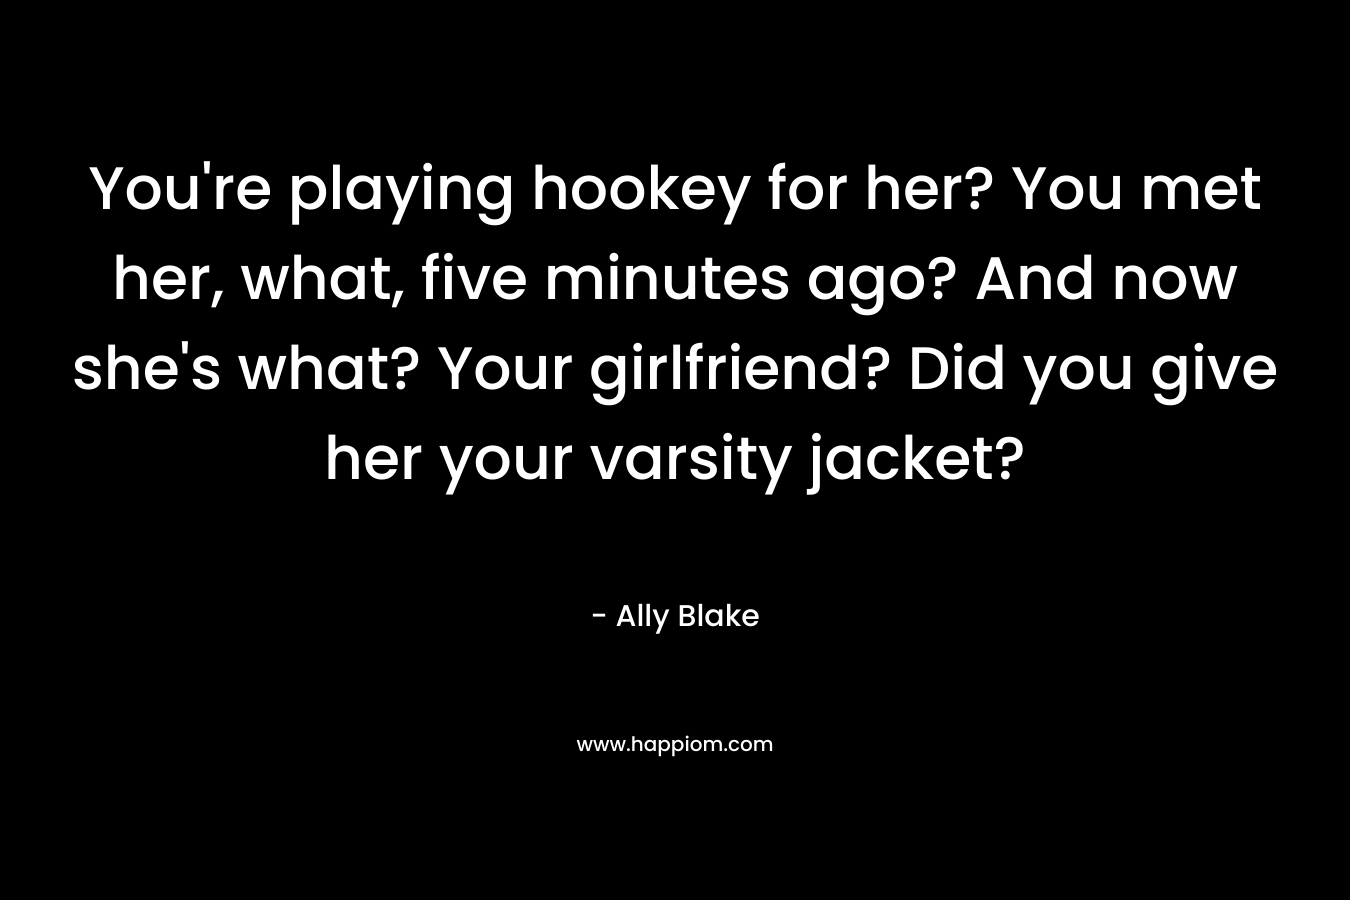 You’re playing hookey for her? You met her, what, five minutes ago? And now she’s what? Your girlfriend? Did you give her your varsity jacket? – Ally Blake